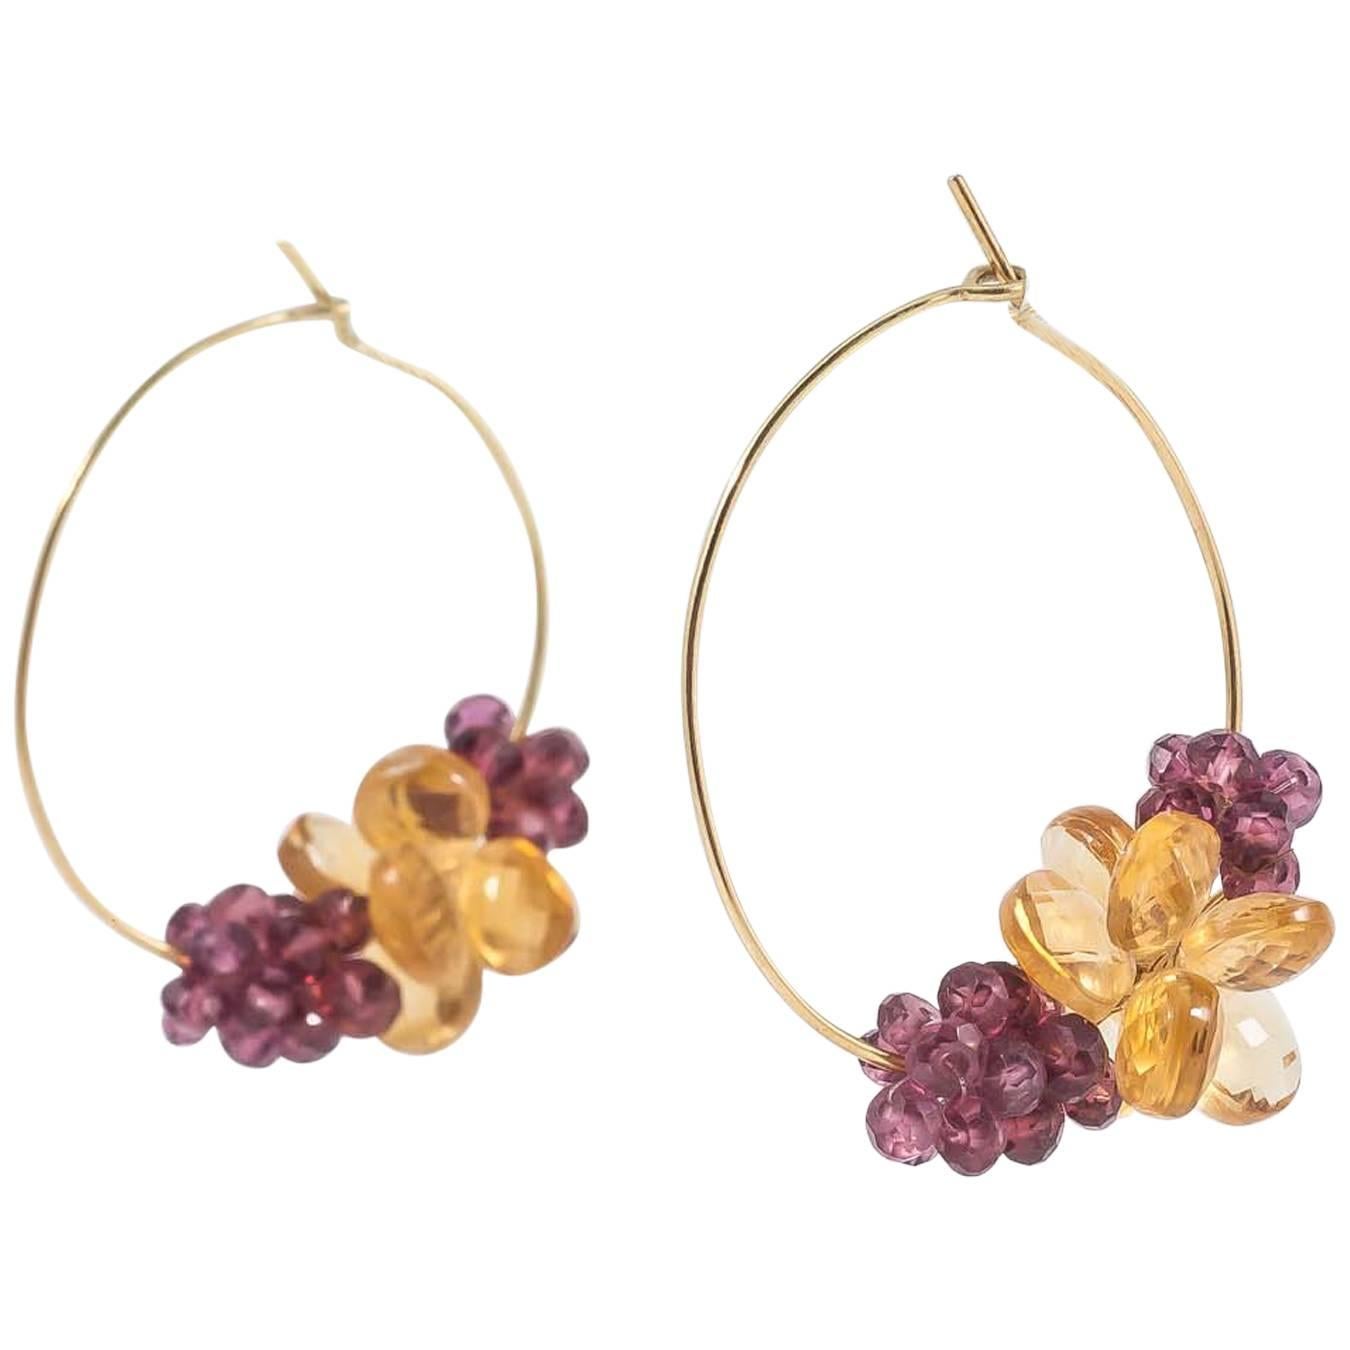 Elegantly contemporary in design, these Donna Brennan 18ct Gold Citine & Rhodolite Garnet Hoop Earrings are handcrafted in her London studio. Light and luscious, these earrings move easily from day to evening wear.

Donna's work typically features